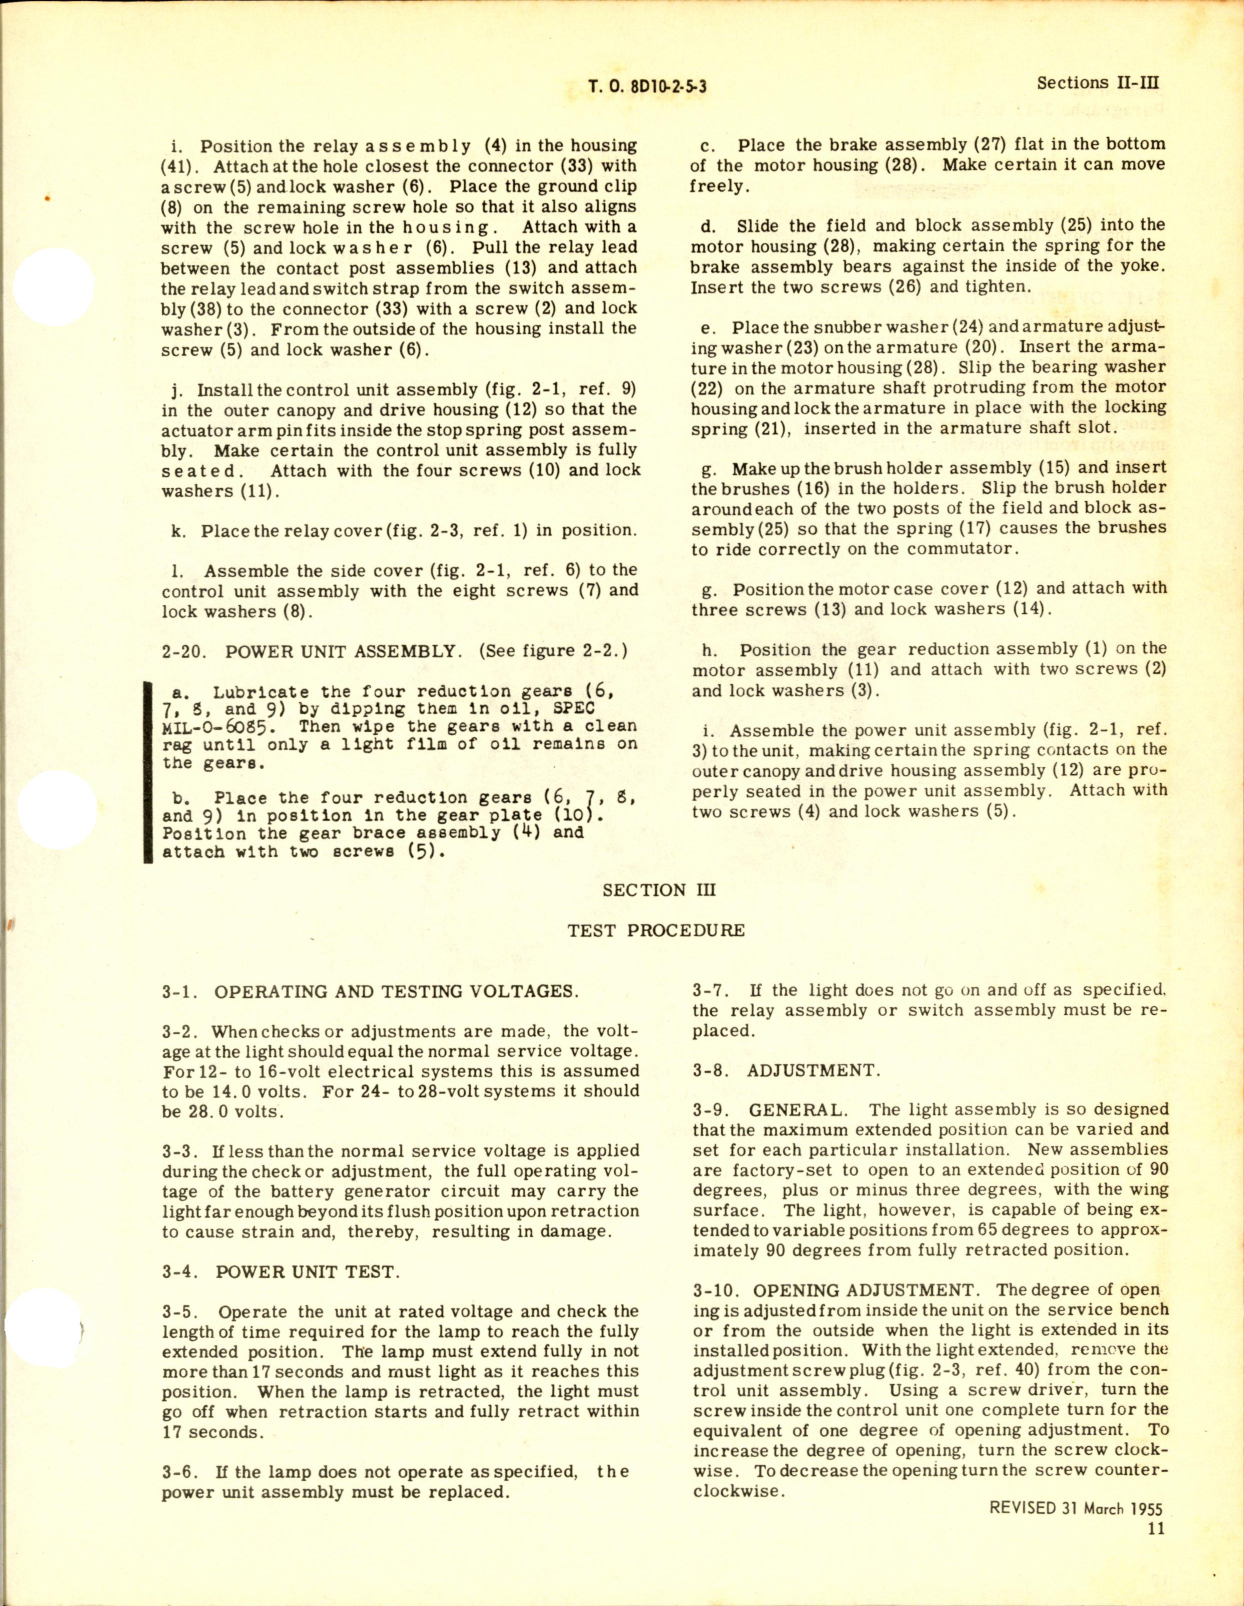 Sample page 3 from AirCorps Library document: Instructions for G-3800 Electrically Retractable Light